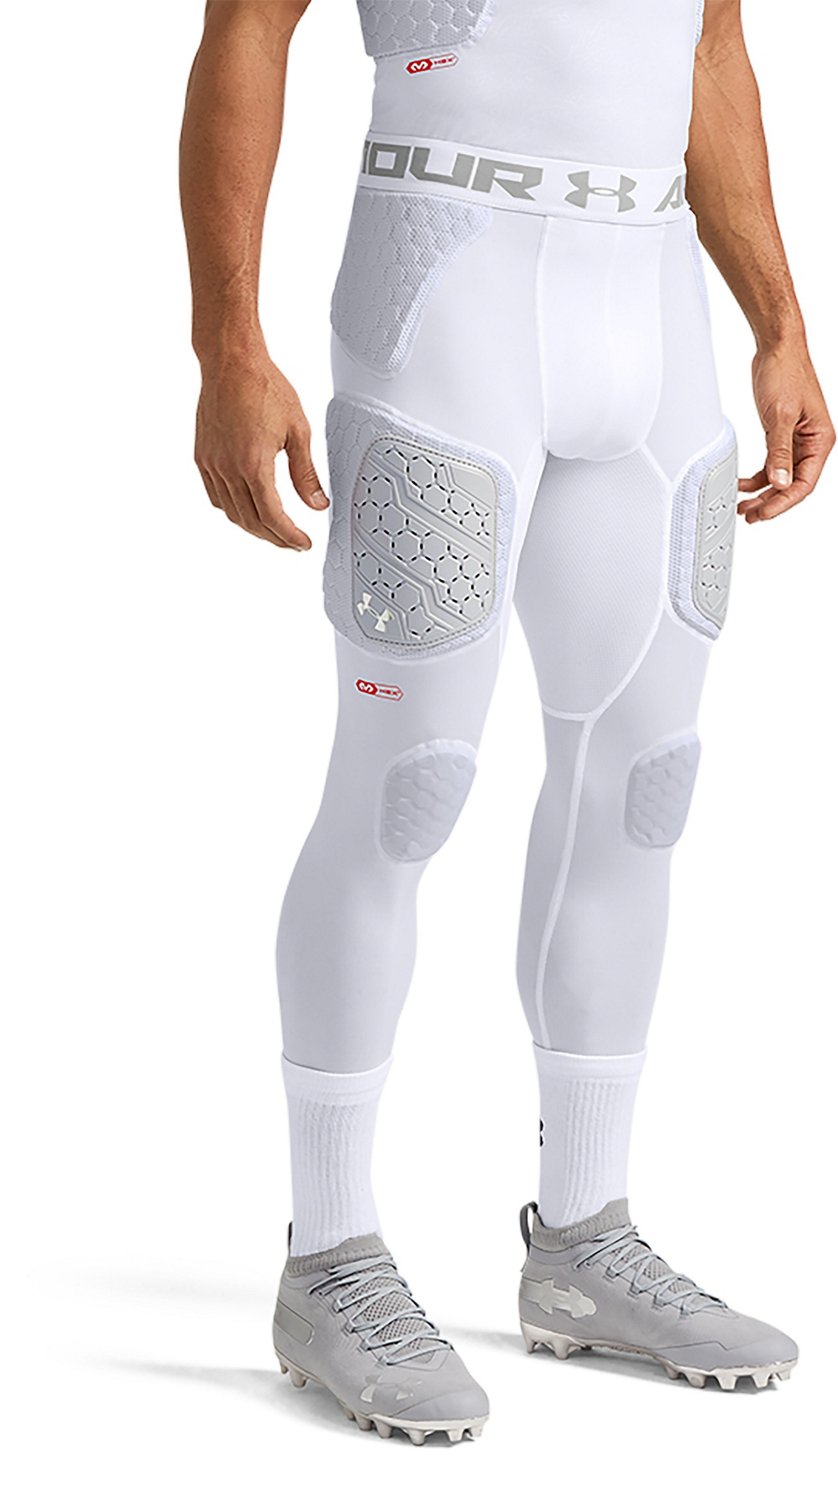 Under Armour Men Sports Stylemen's Compression Running Tights - Gym & Sports  Leggings With Knee Pads